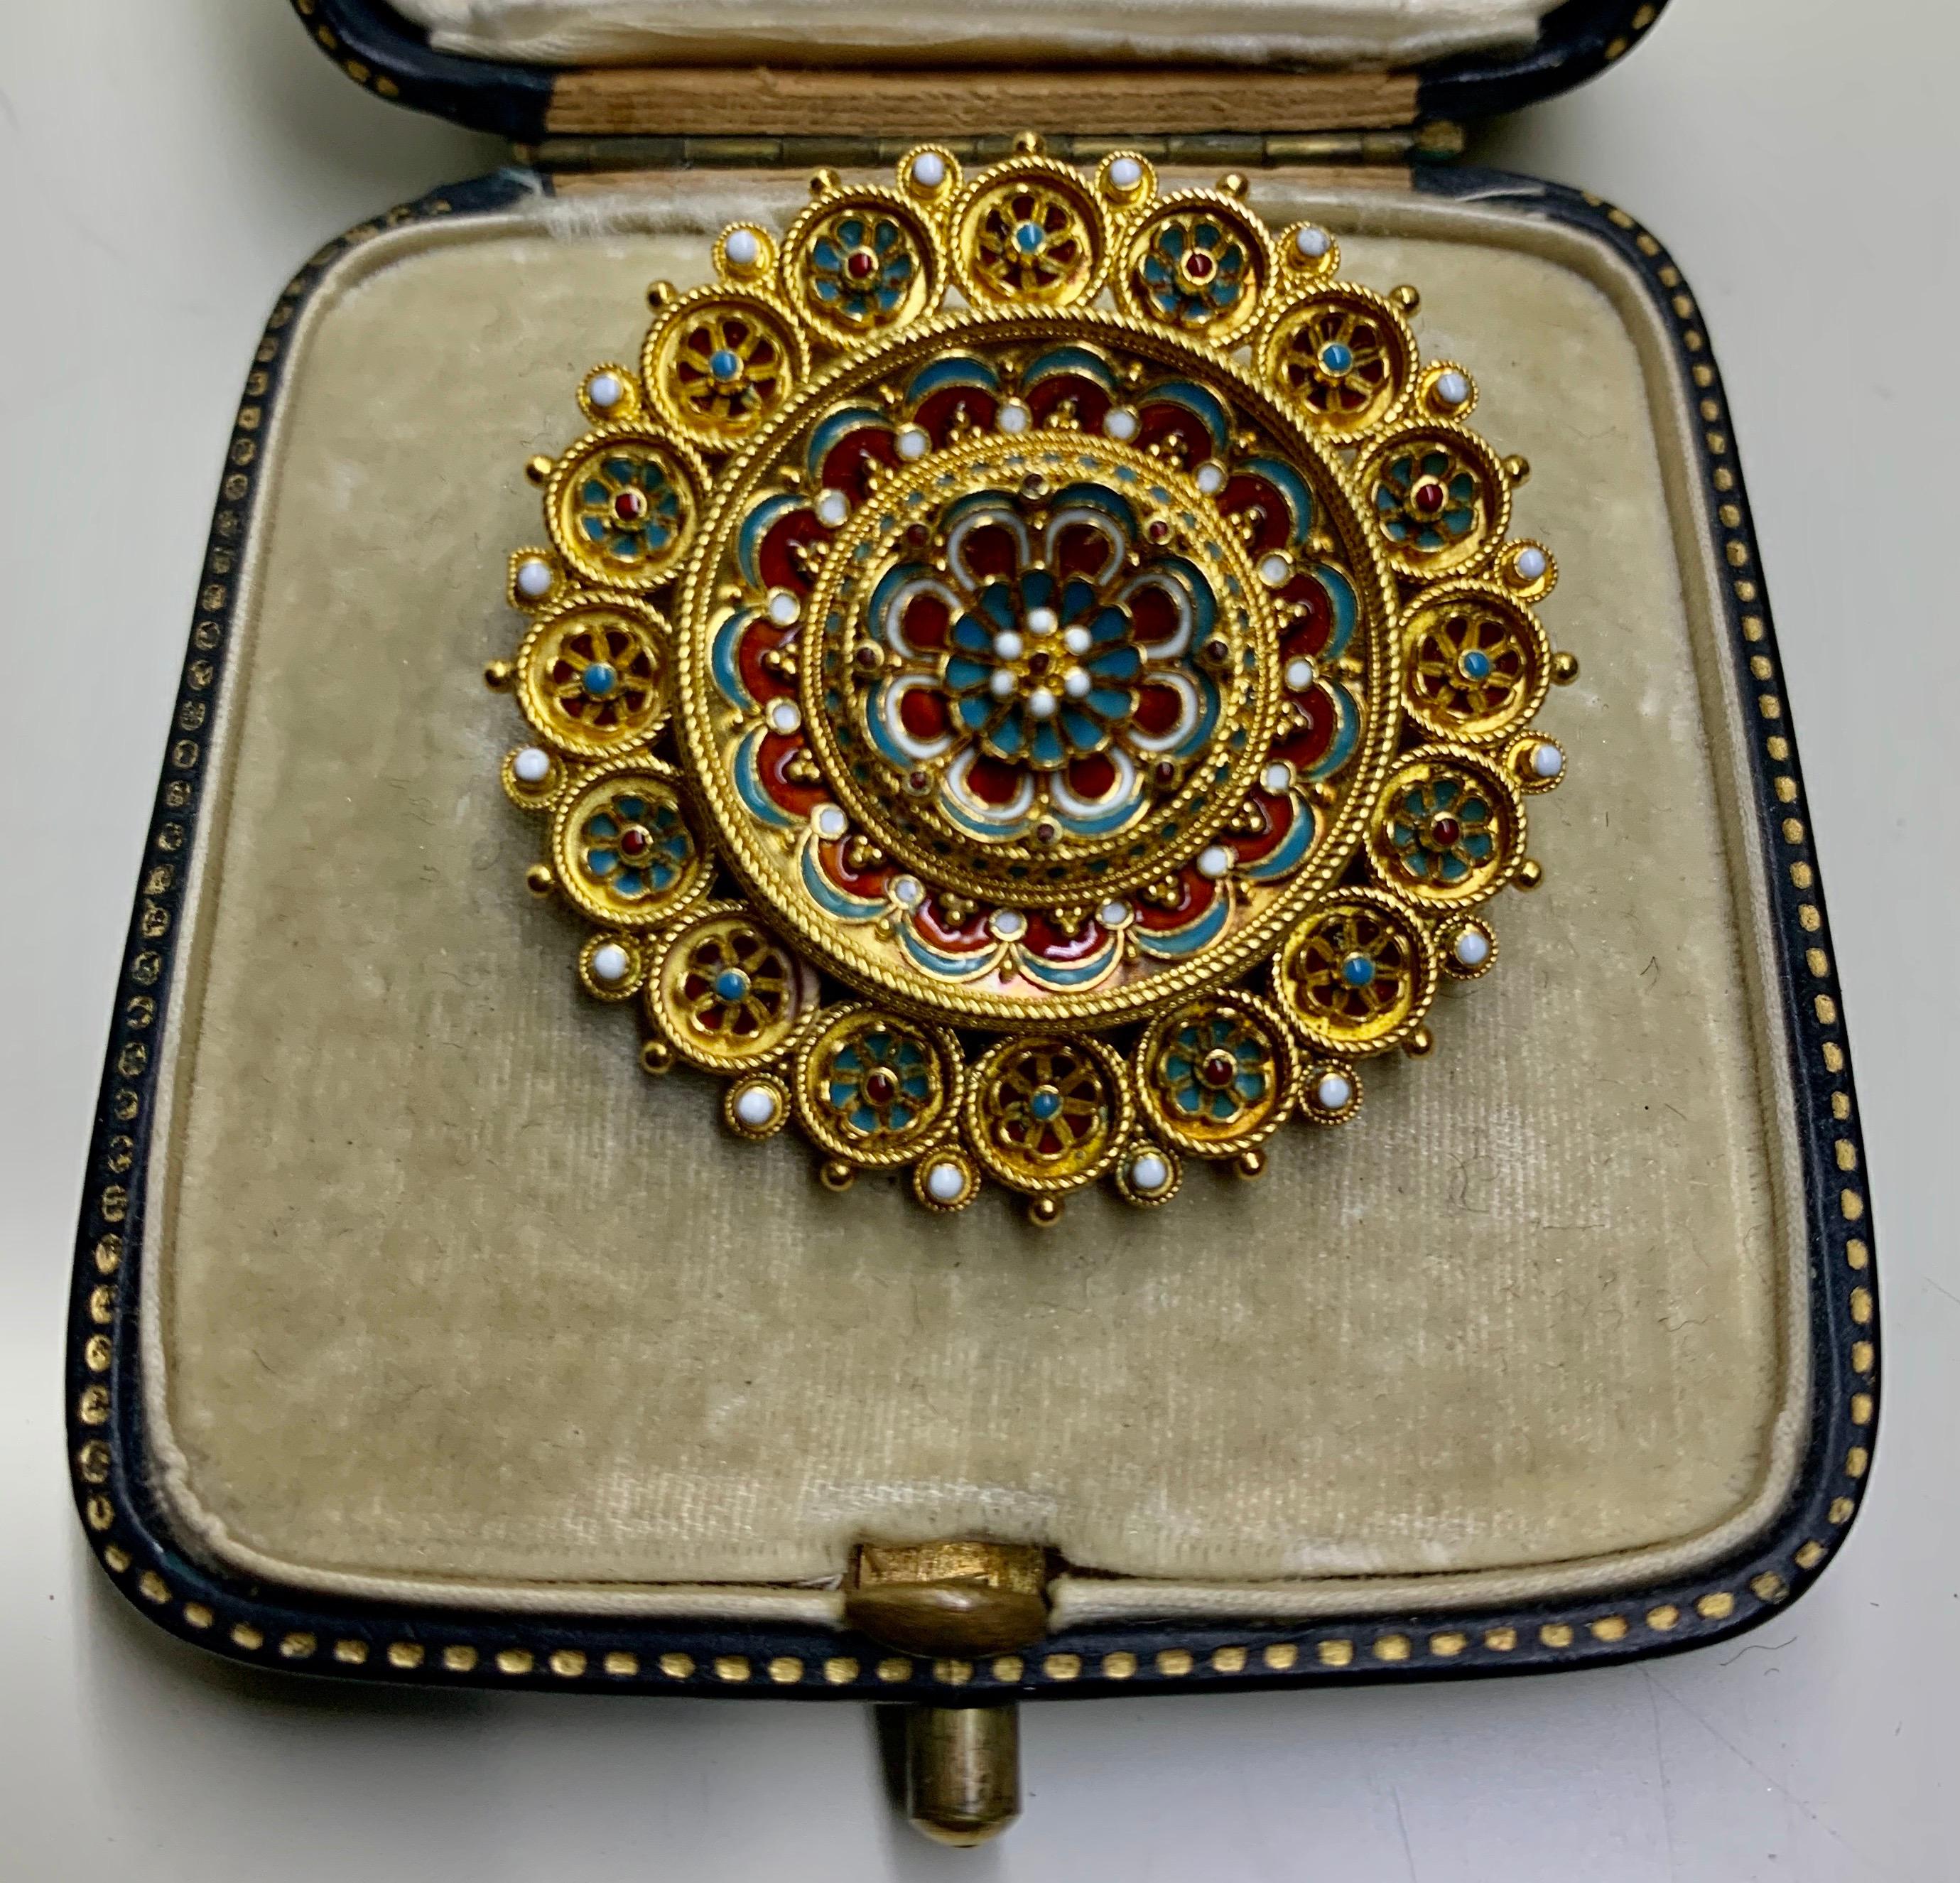 The circular disk centred with a flower head with a garnet in the centre, with white enamel beads and turquoise enamel petals surrounding it.
This entire Brooch is made up of 18 Garnets cabochons. 8 Turquoise cabochons stones
these stones are very